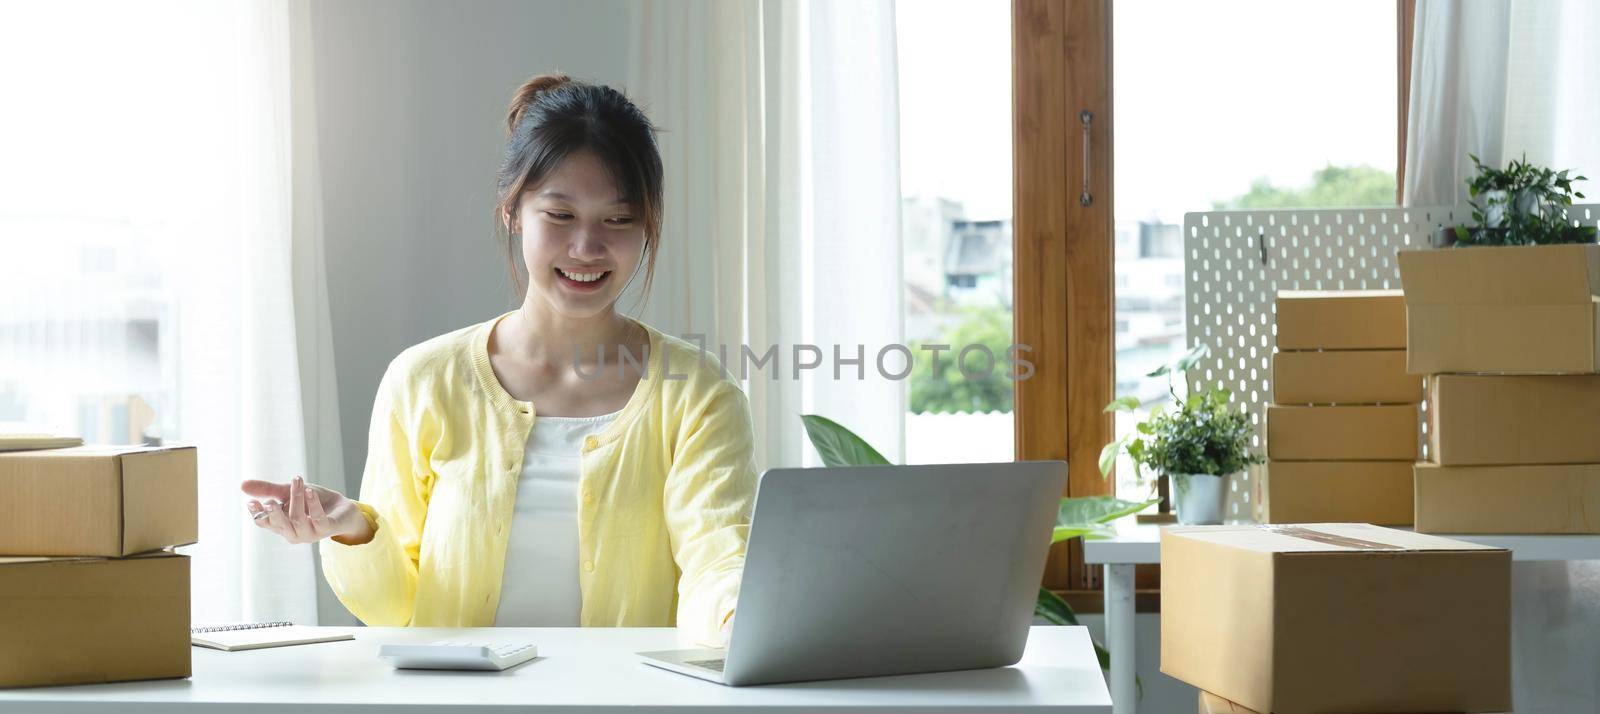 A portrait of Asian woman, e-commerce employee sitting in the office full of packages on the table using a laptop and calculator, for SME business, e-commerce, technology and delivery business..